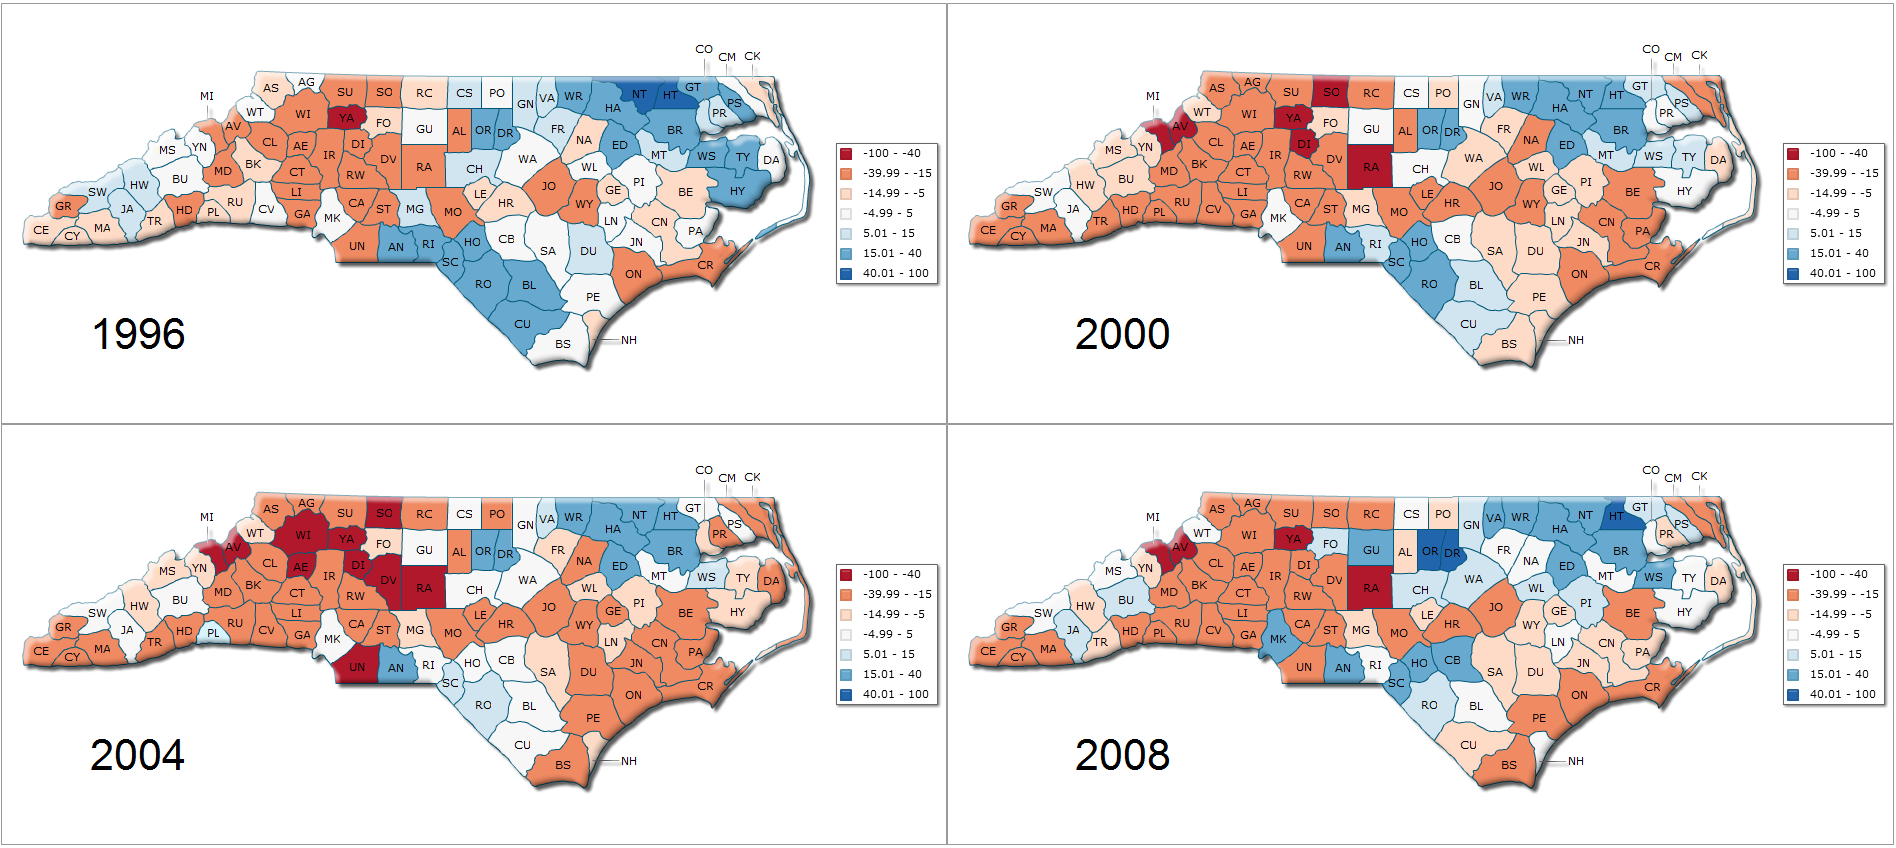 Presidential election results for North Carolina counties 1996-2008